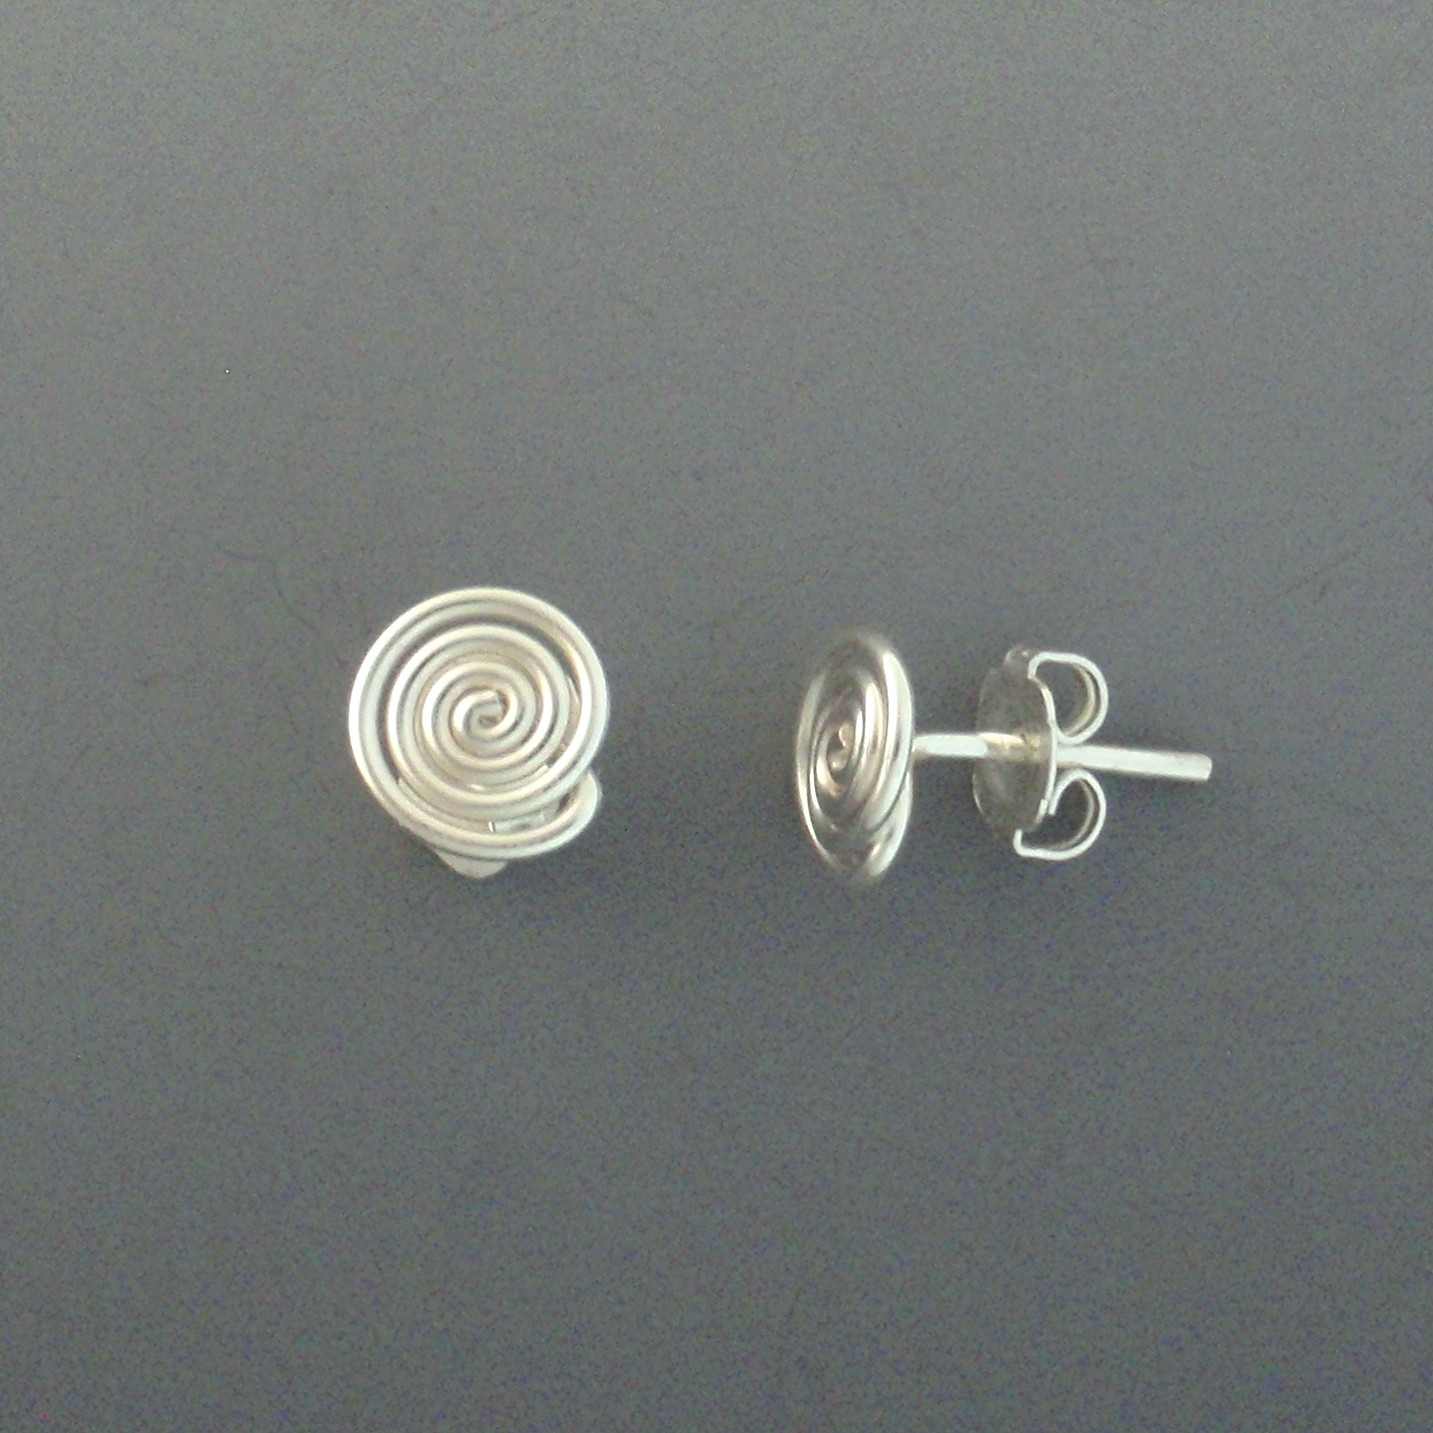 Spiral Post Earrings - BJChristian Designs Jewelry - Beauty For Your Soul